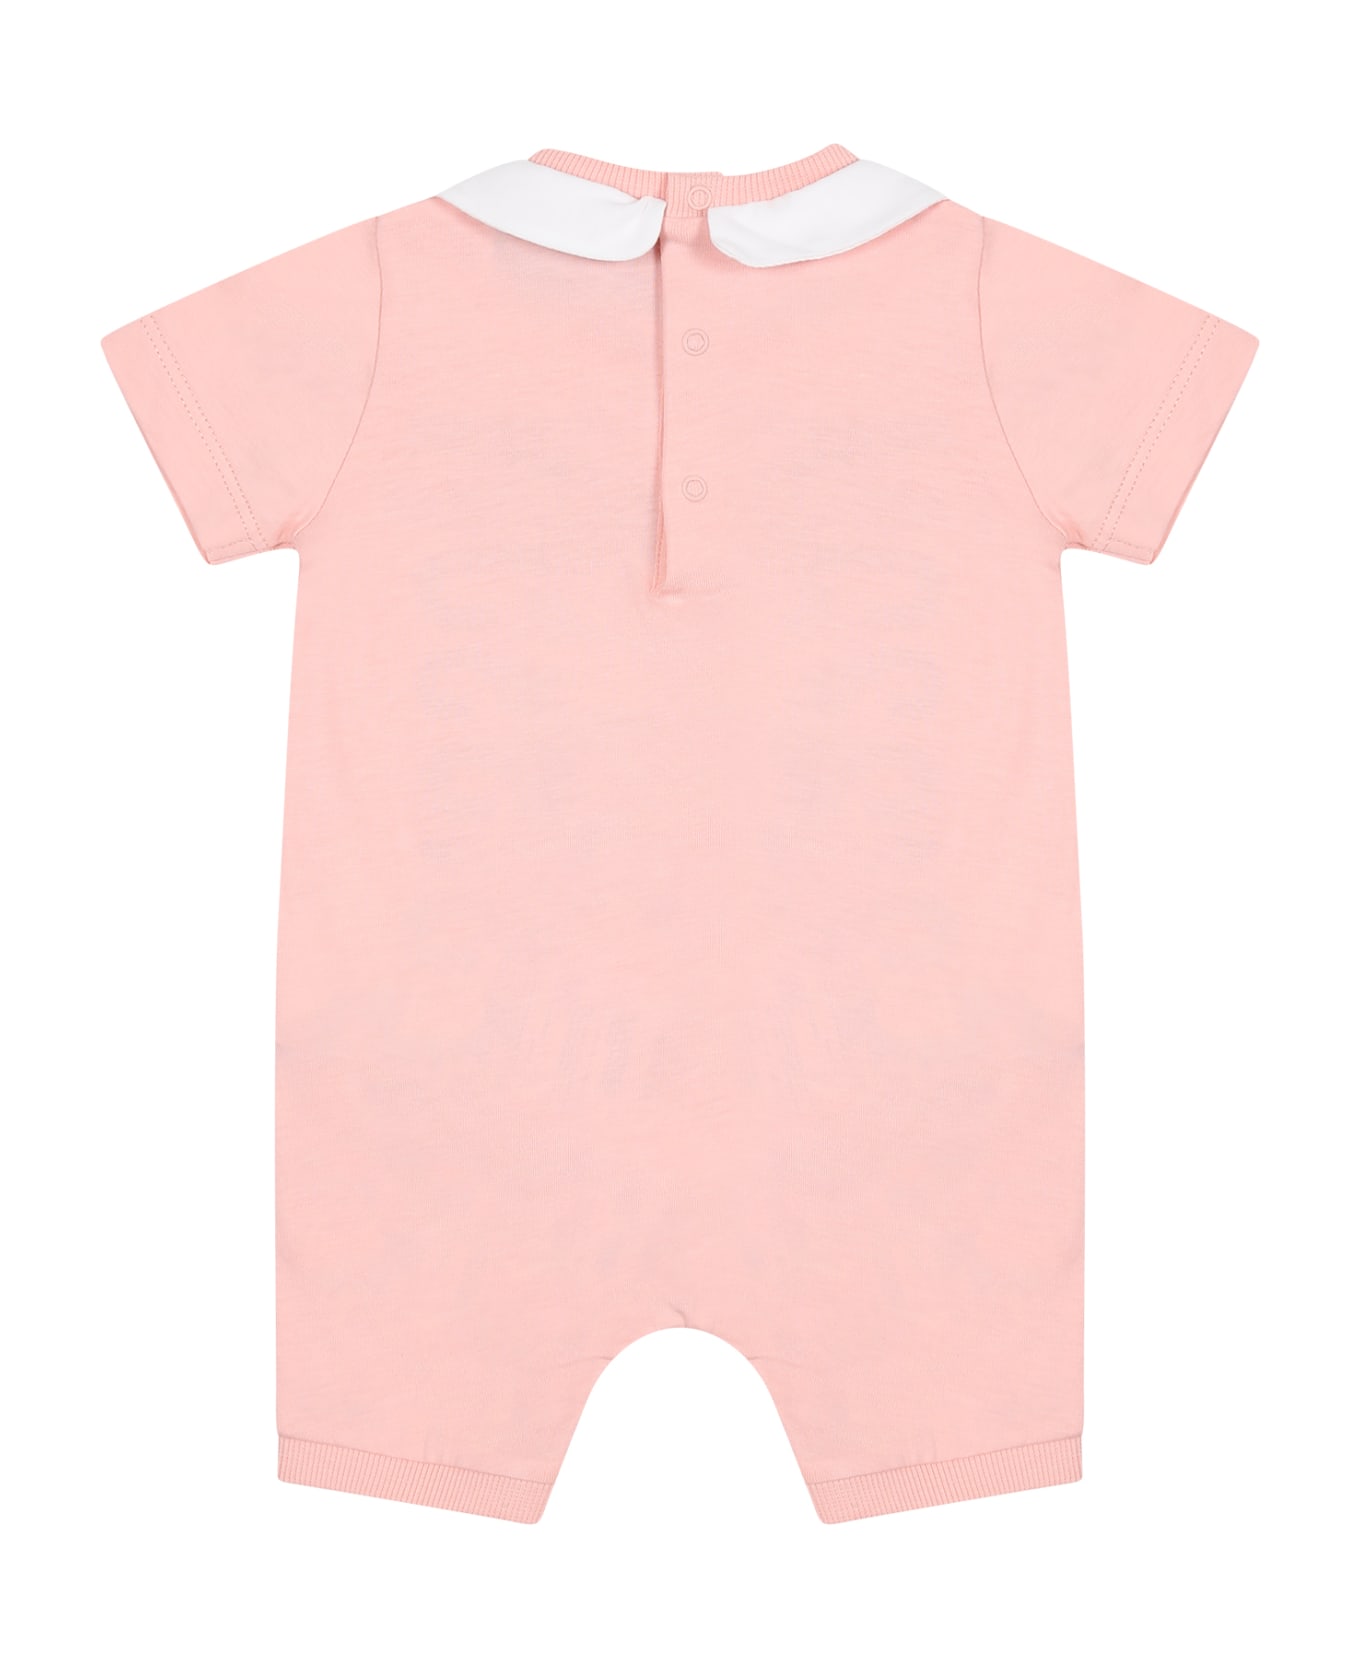 Moschino Pink Romper For Baby Kids With Teddy Bear - PINK